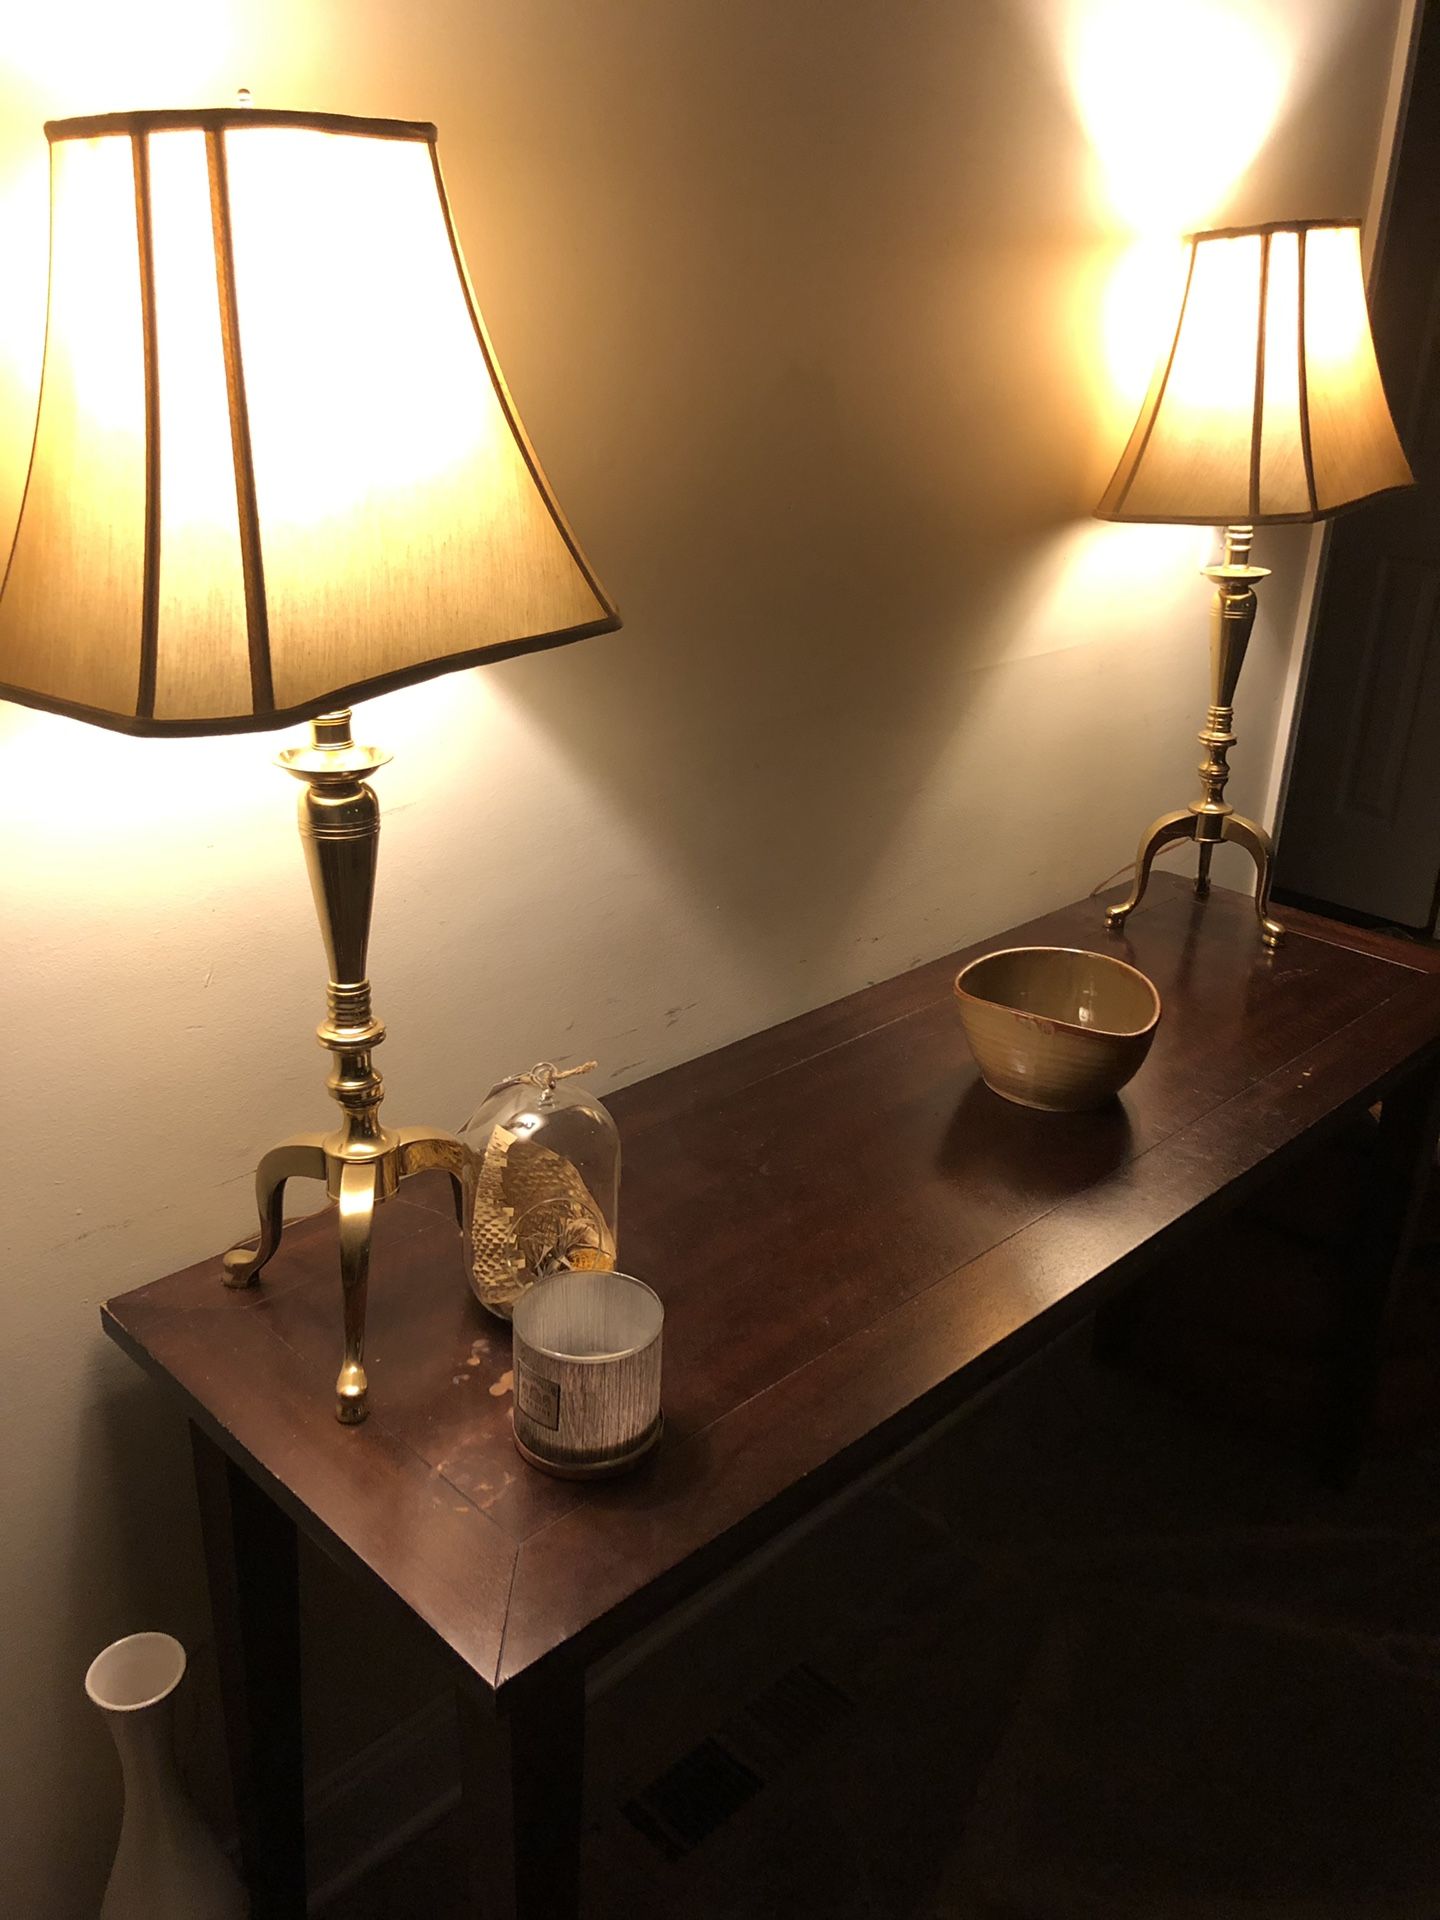 Set of two brass lamps with shades